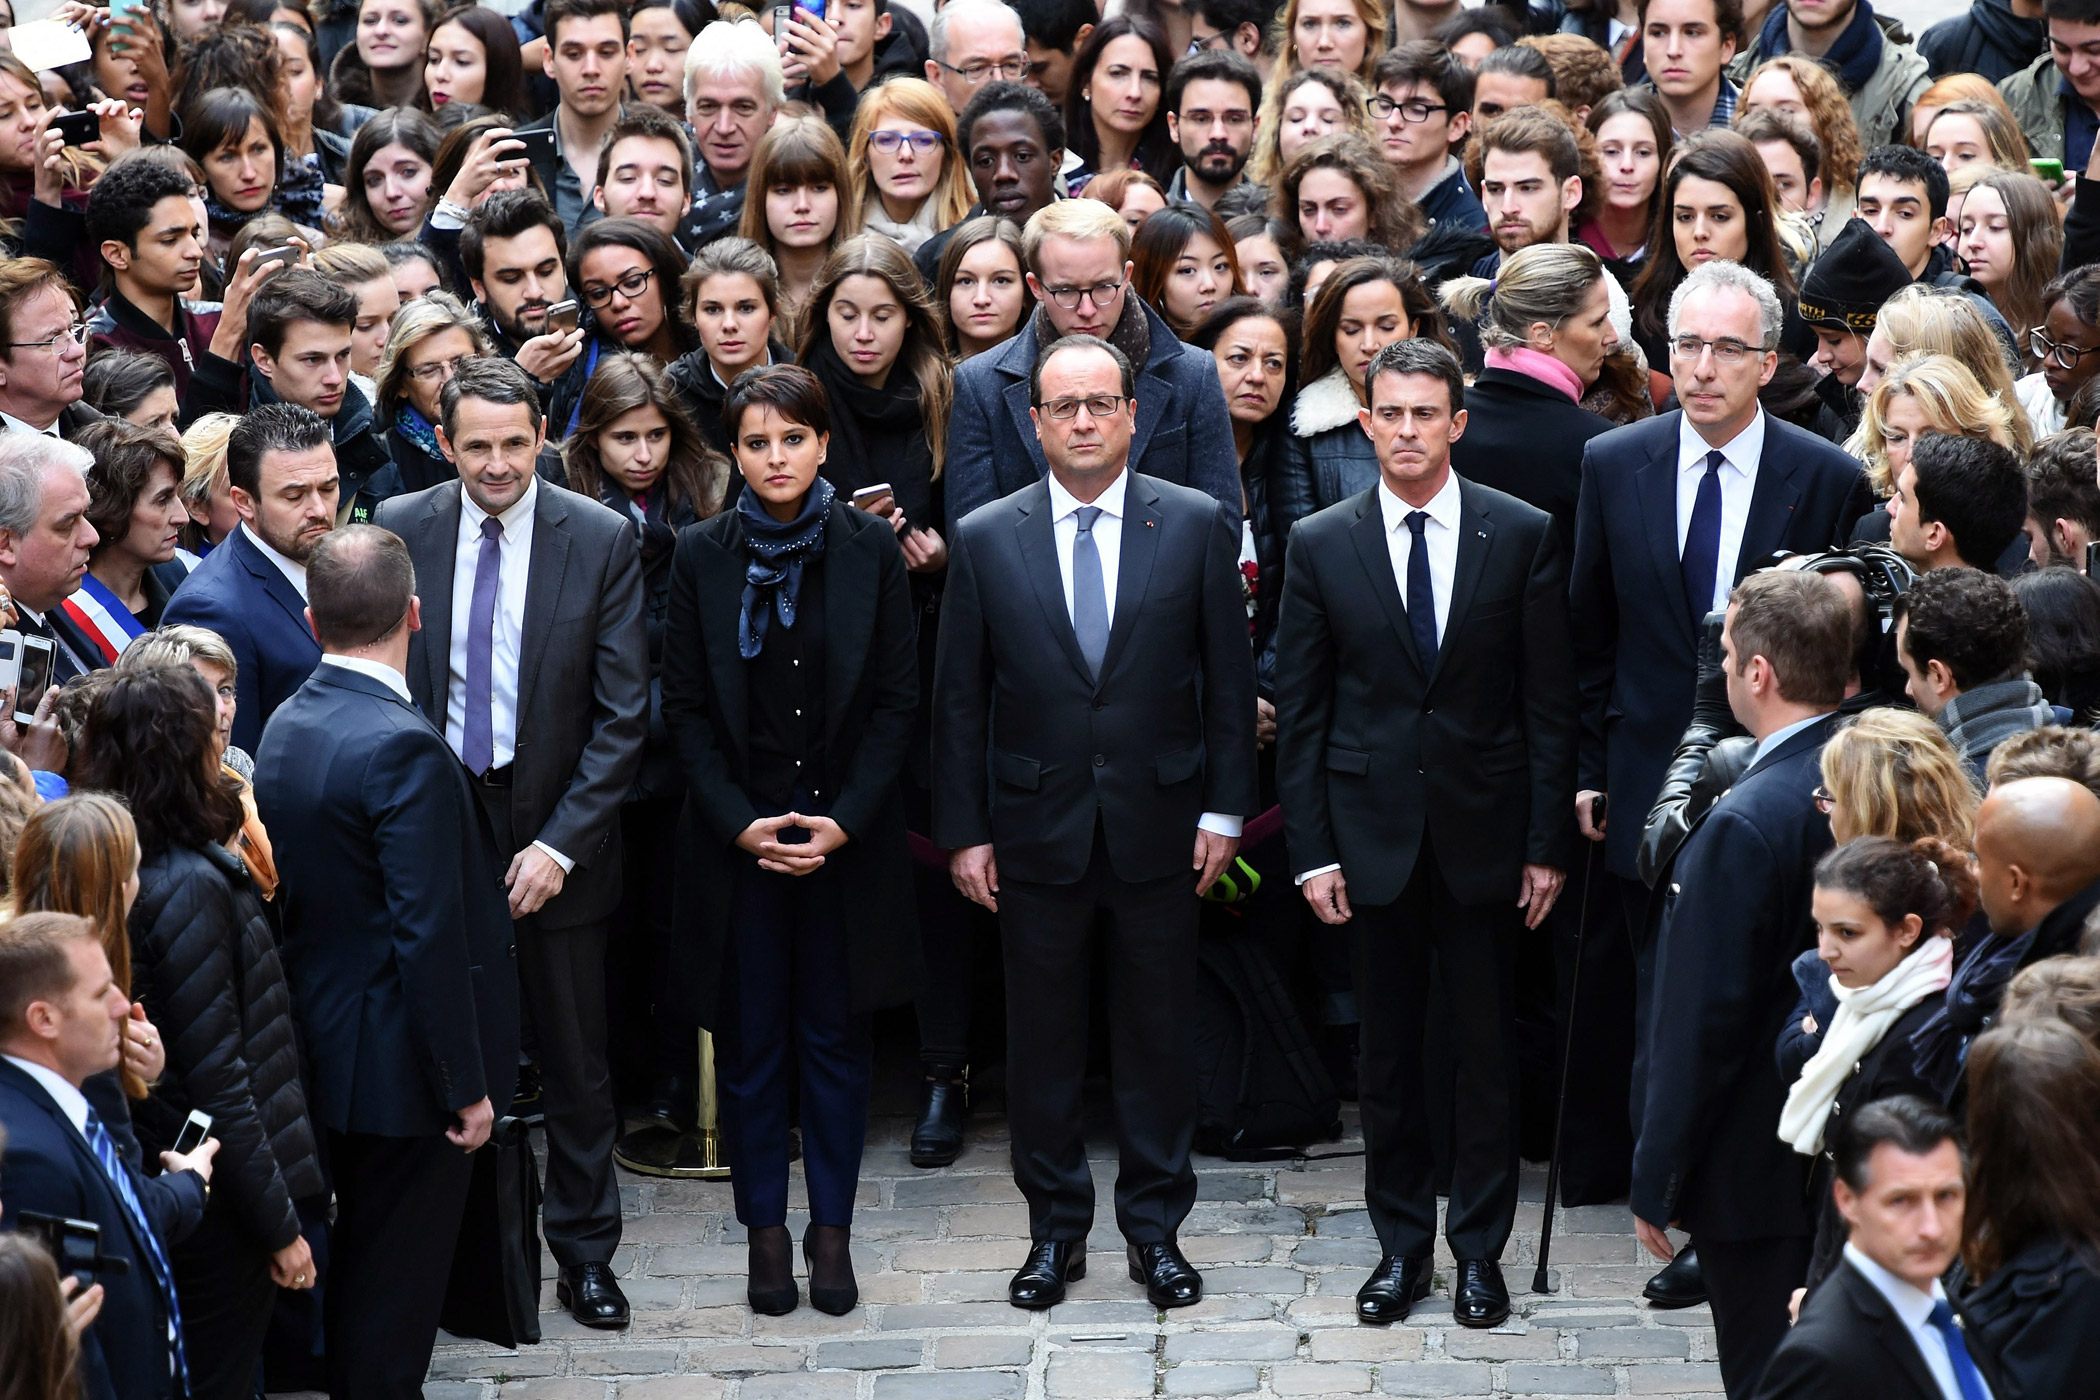 French President Francois Hollande, center, observes a minute of silence for the victims of the Nov. 13 attacks on Paris at the Sorbonne University on Nov. 16, 2015. French Minister for Higher Education and Research Thierry Mandon, center left, French Education Minister Najat Vallaud-Belkacem, and French Prime Minister Manuel Vallse join Hollande.